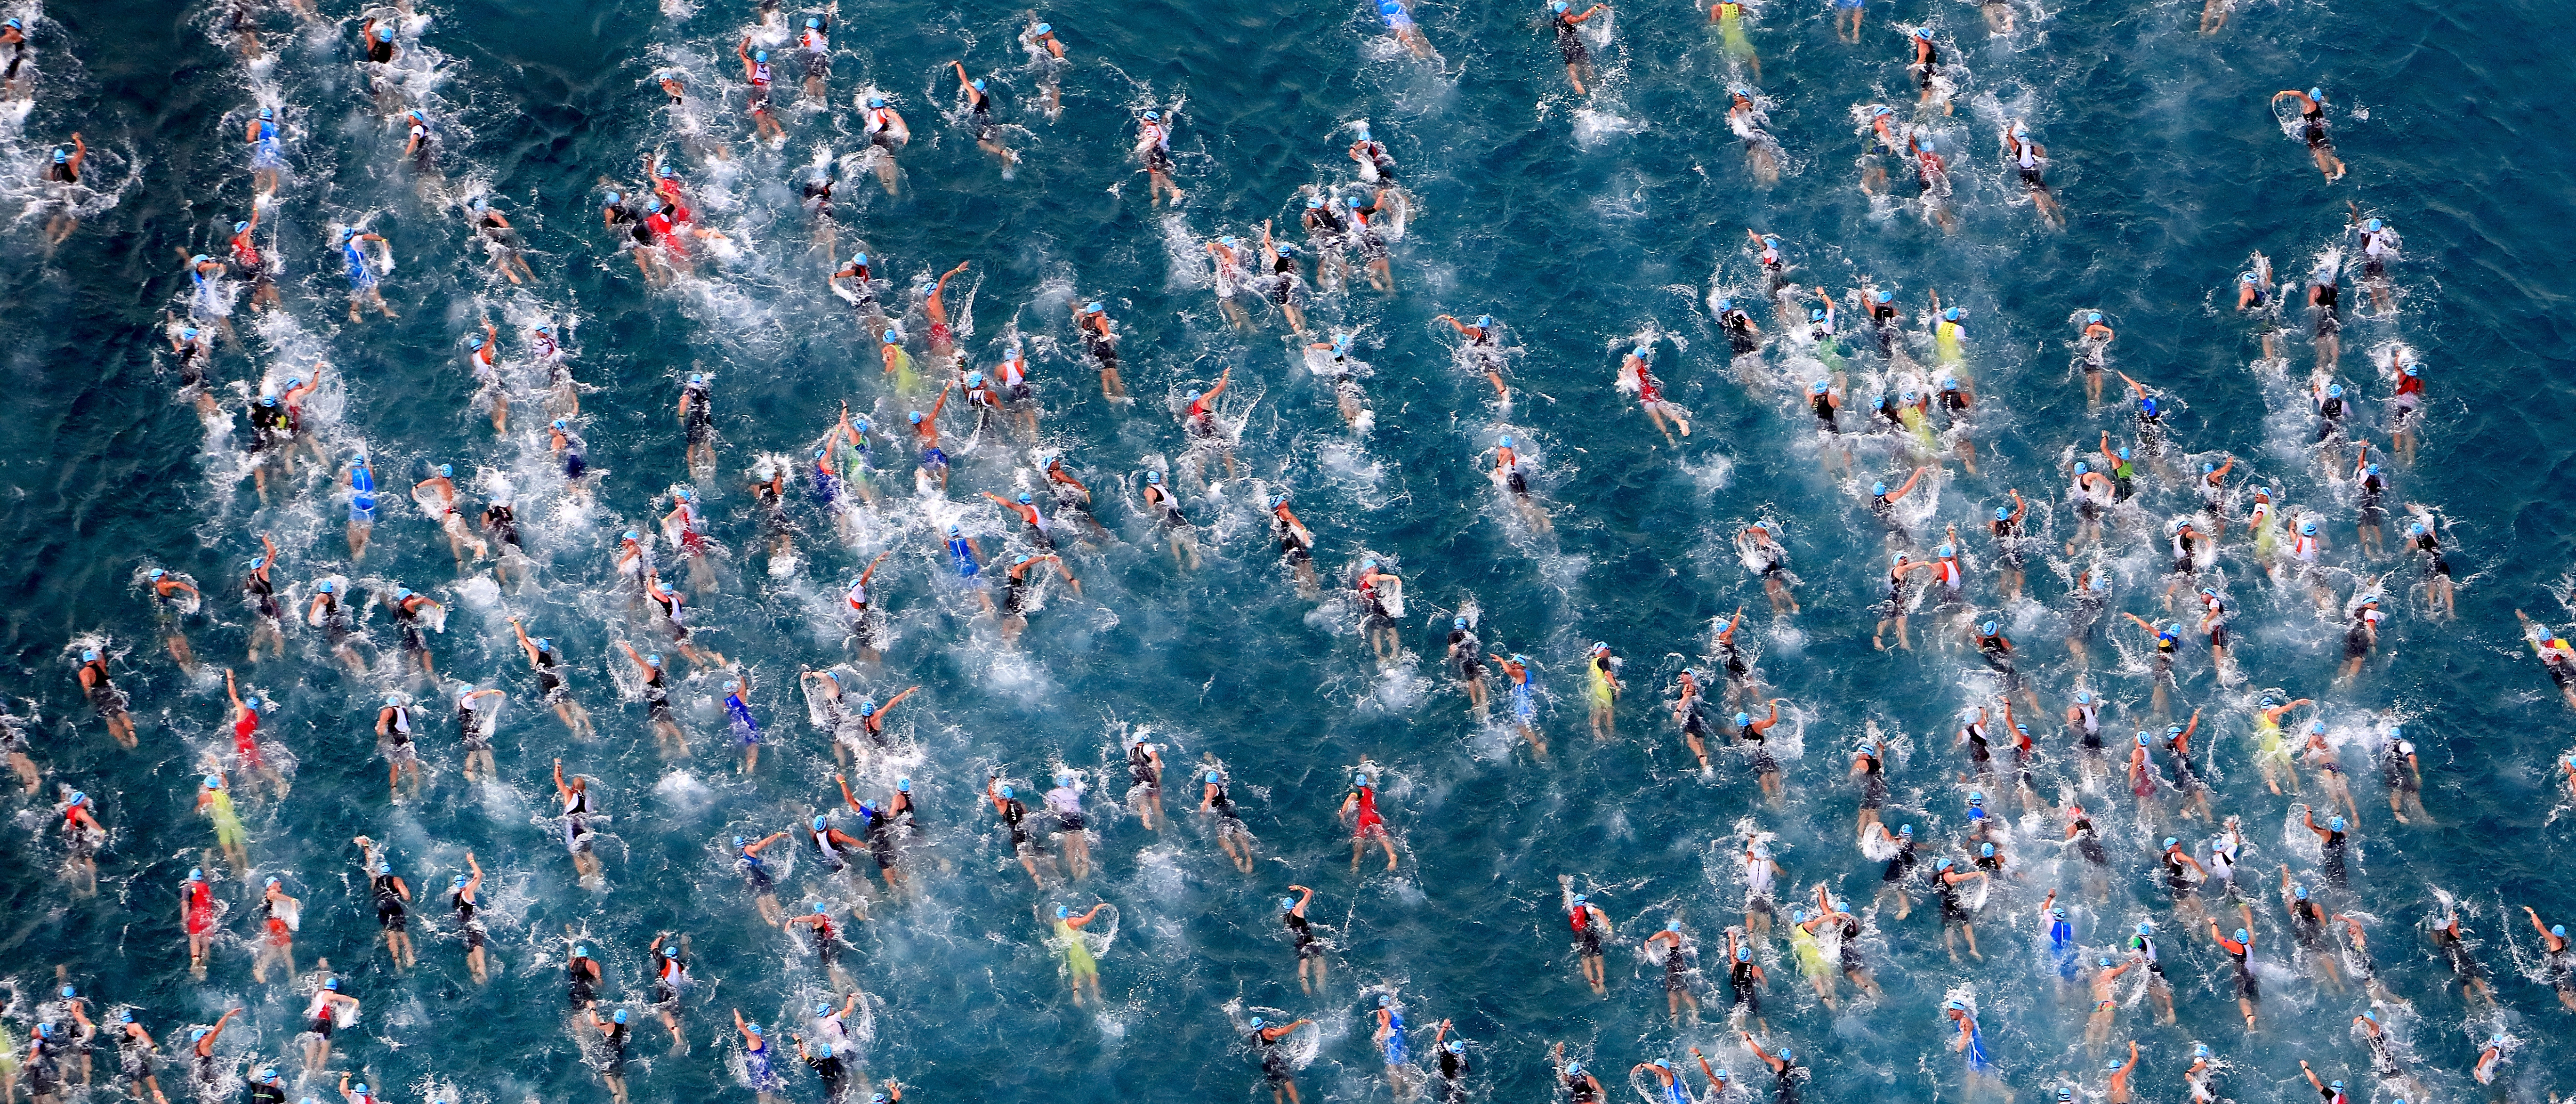 7 things I wish I knew before my first open water swim event